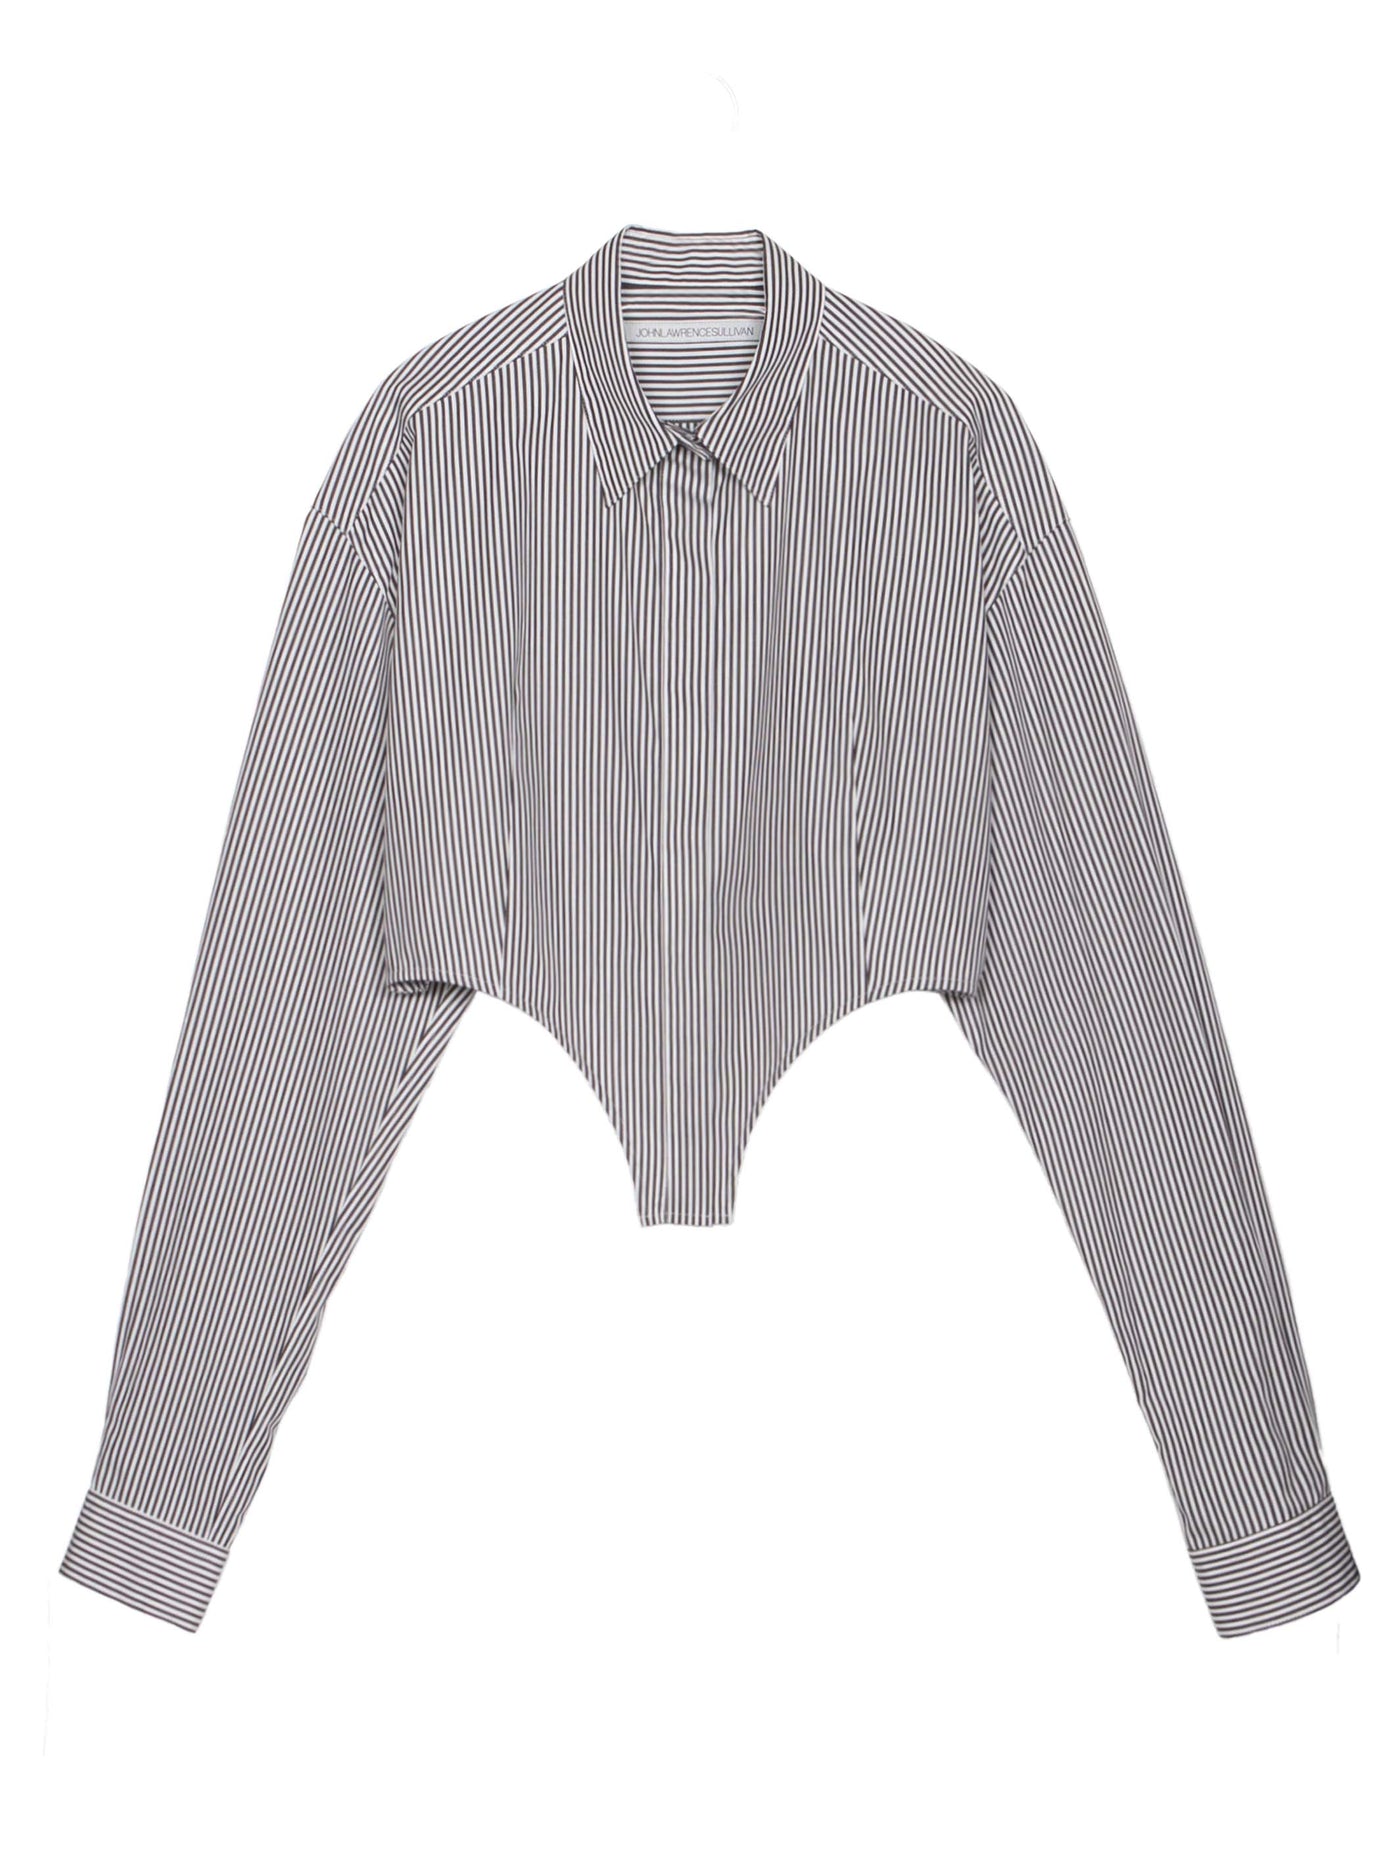 Stripe broadcloth fly front cutting shirt